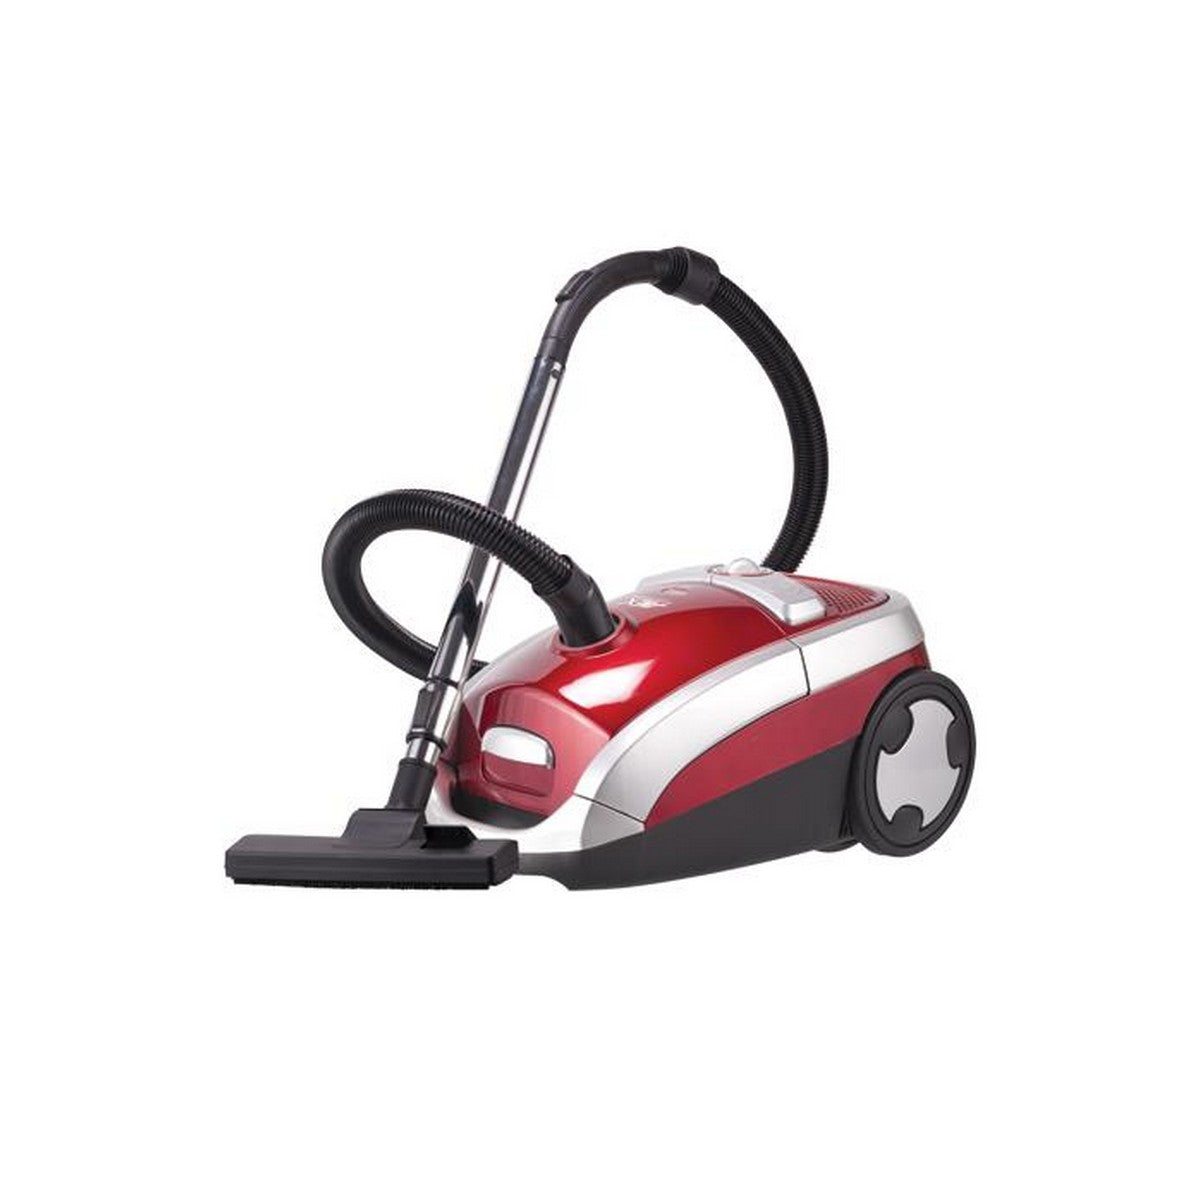 Anex Home Appliances Vacuum Cleaner - AG-2093 Deluxe